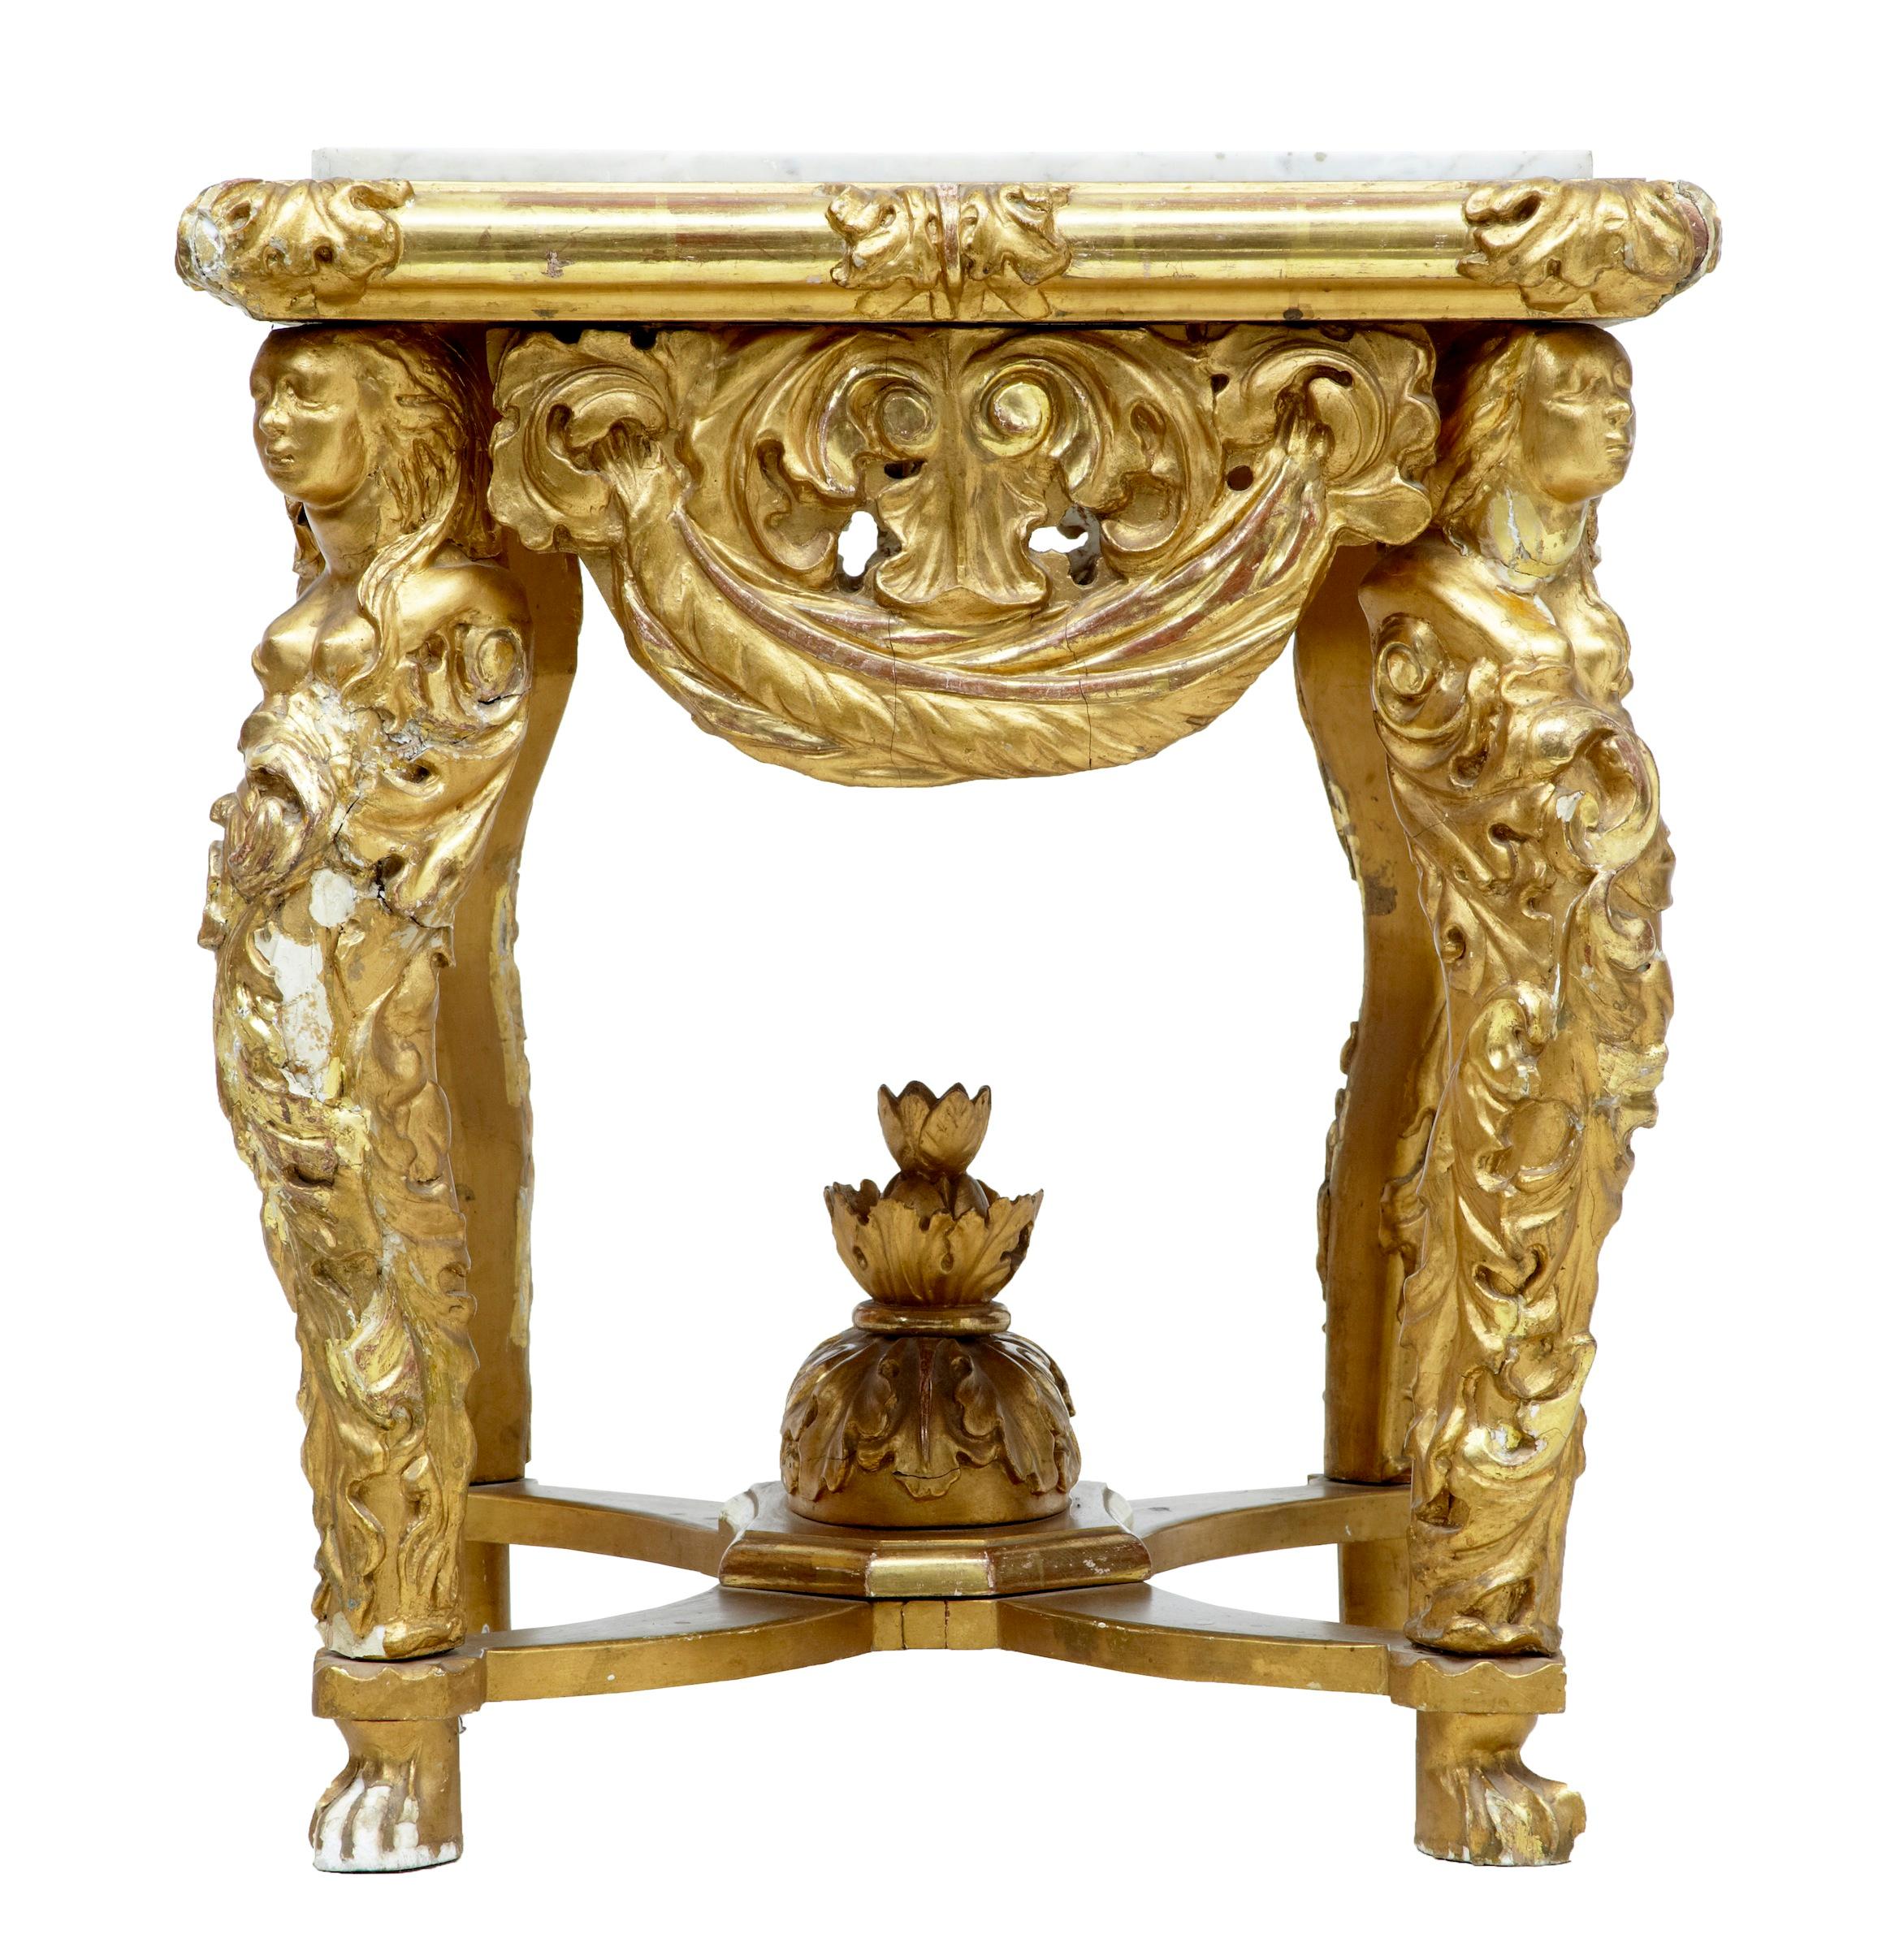 Rococo Revival Italian 19th Century Carved Gilt Marble Top Center Table